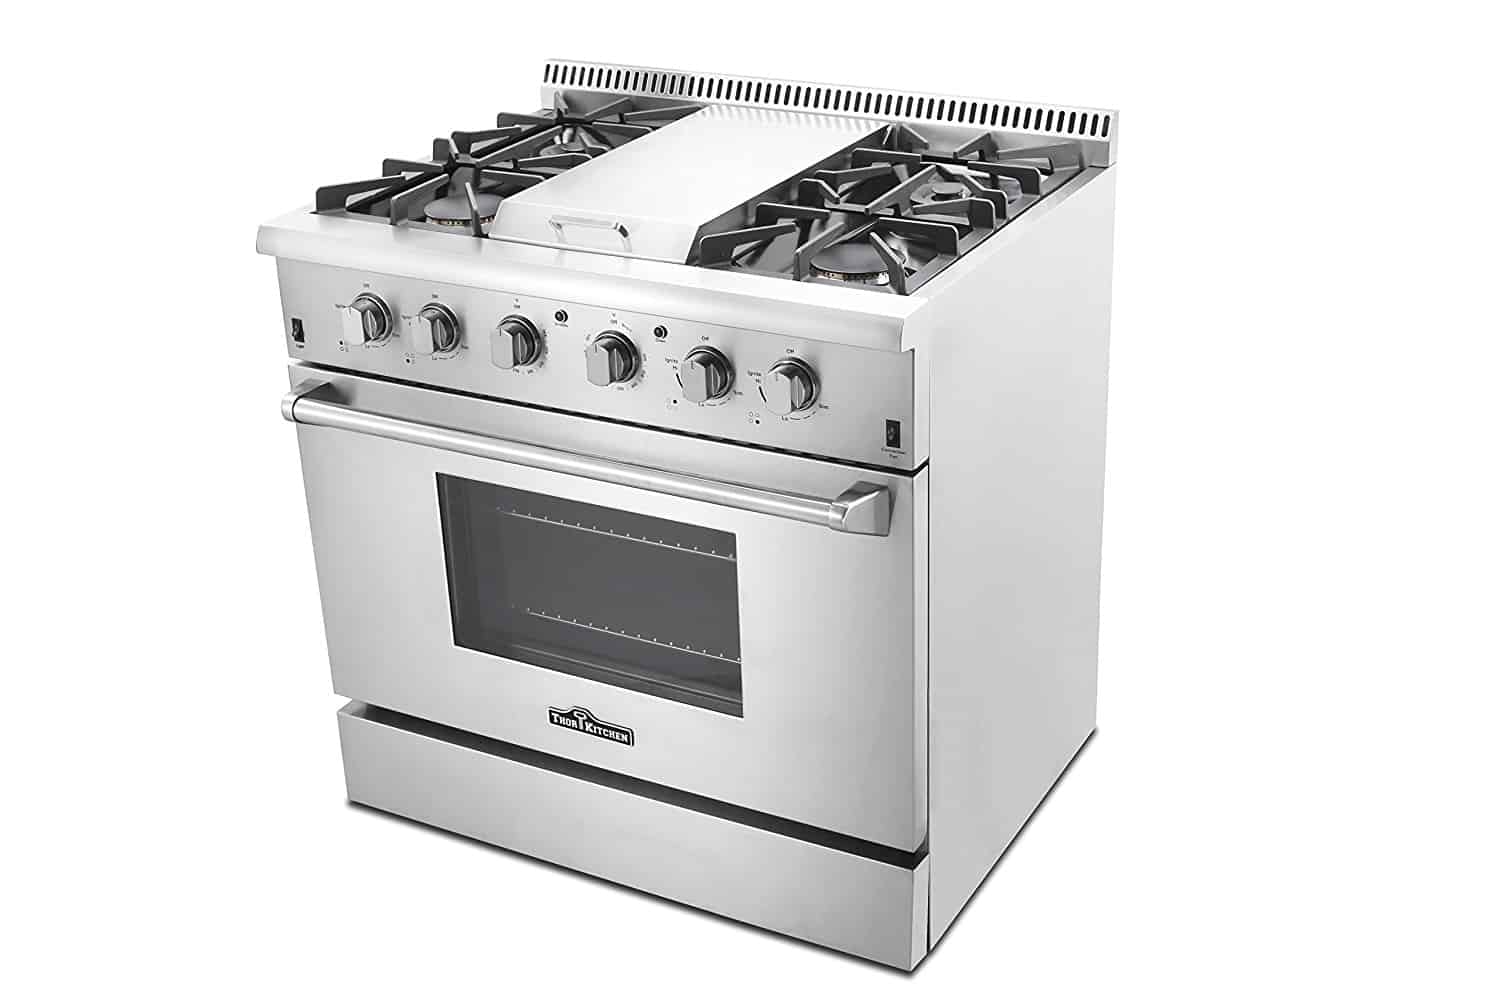 The Best Gas Range to Have in 2022 Daring Kitchen